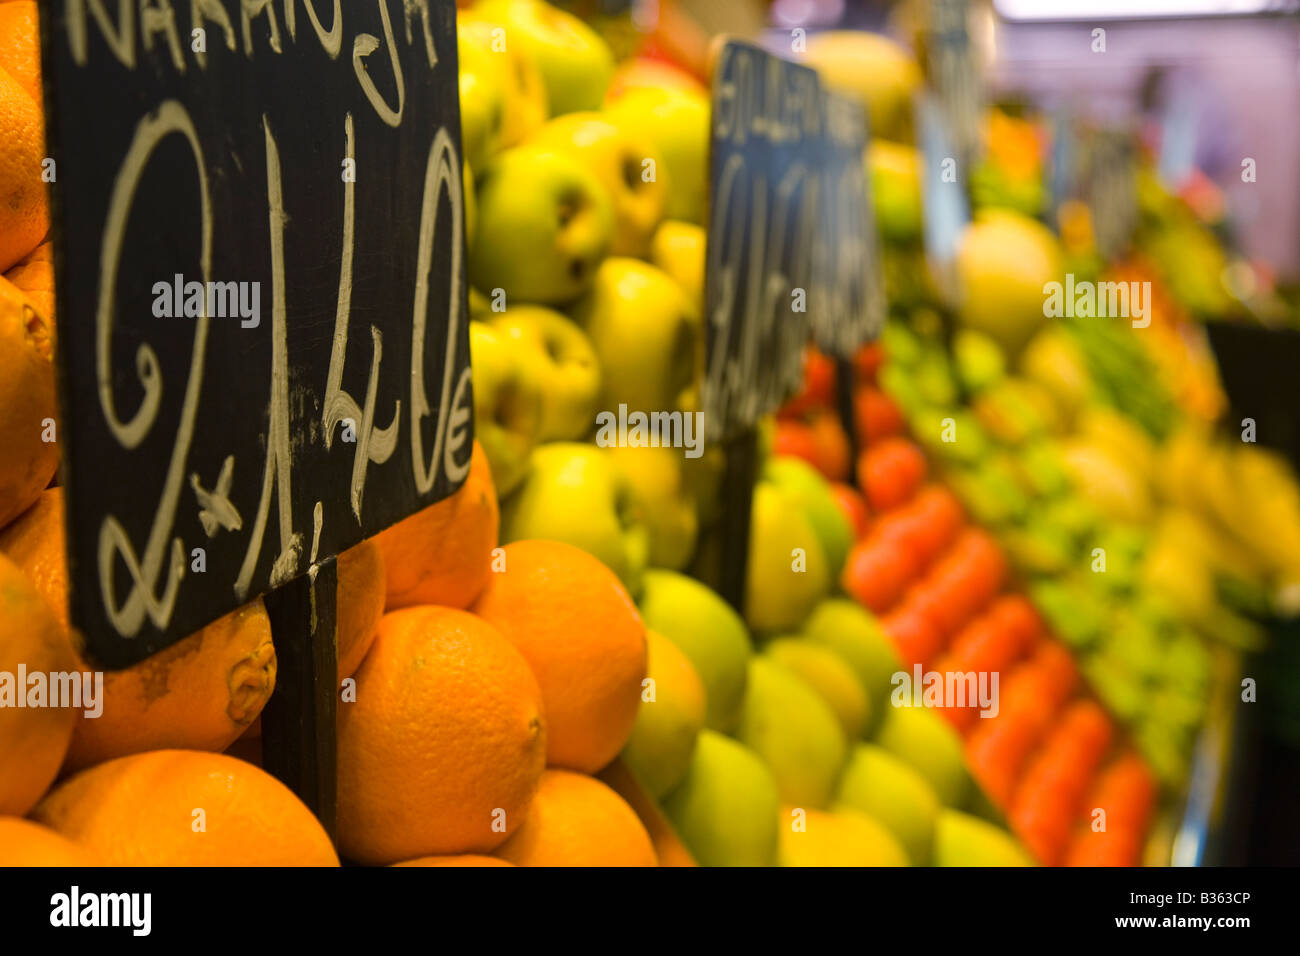 SPAIN Barcelona Piles of oranges apples and other fruit on display at La Boqueria produce market price sign in Euros Stock Photo